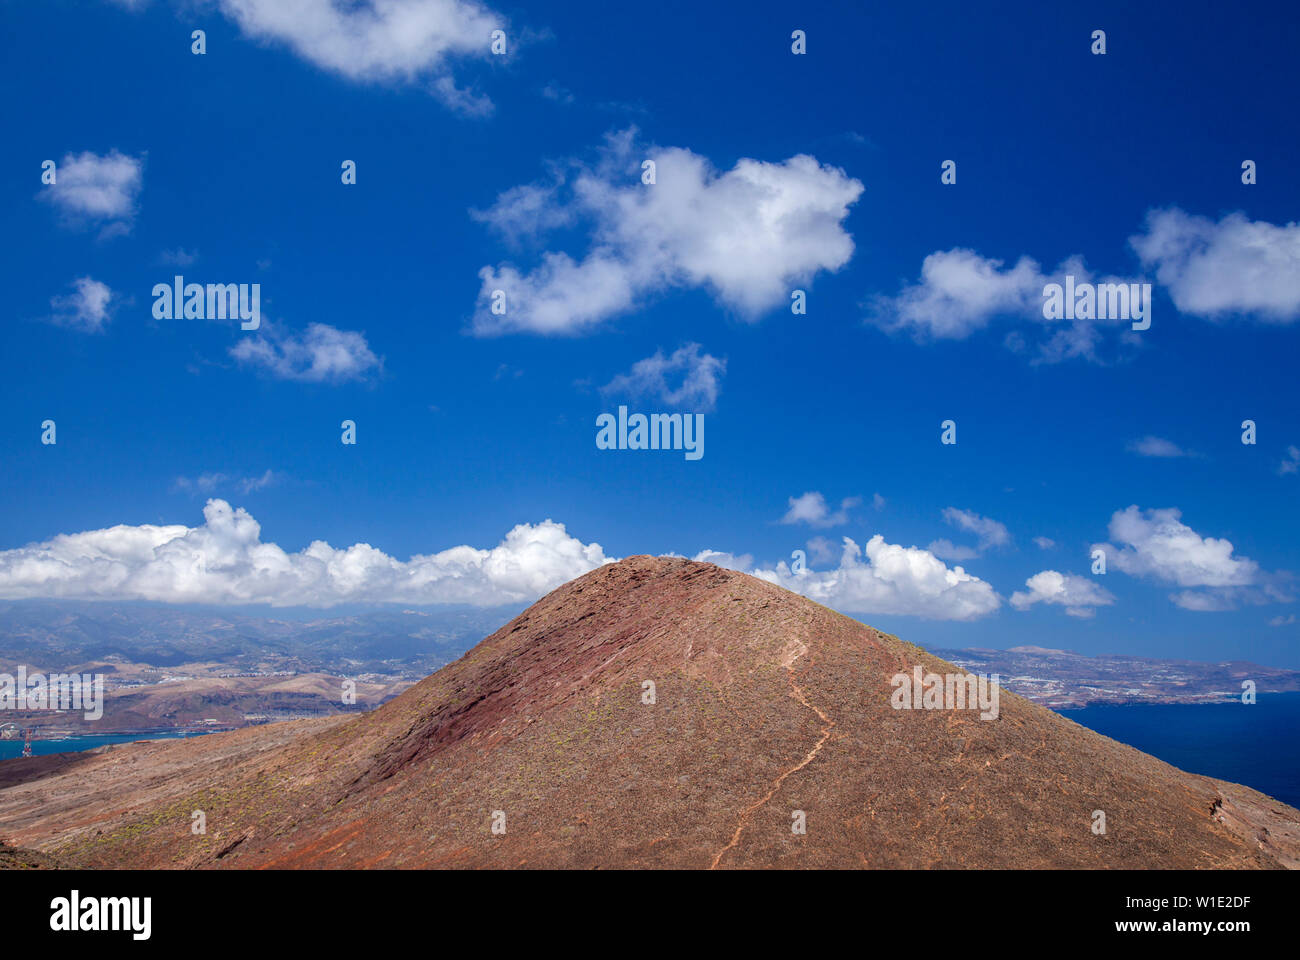 Gran Canaria, Canary Islands, image taken  from La Isleta peninsula, Montana las Coloradas in the foreground, natural background of predominantly sky Stock Photo